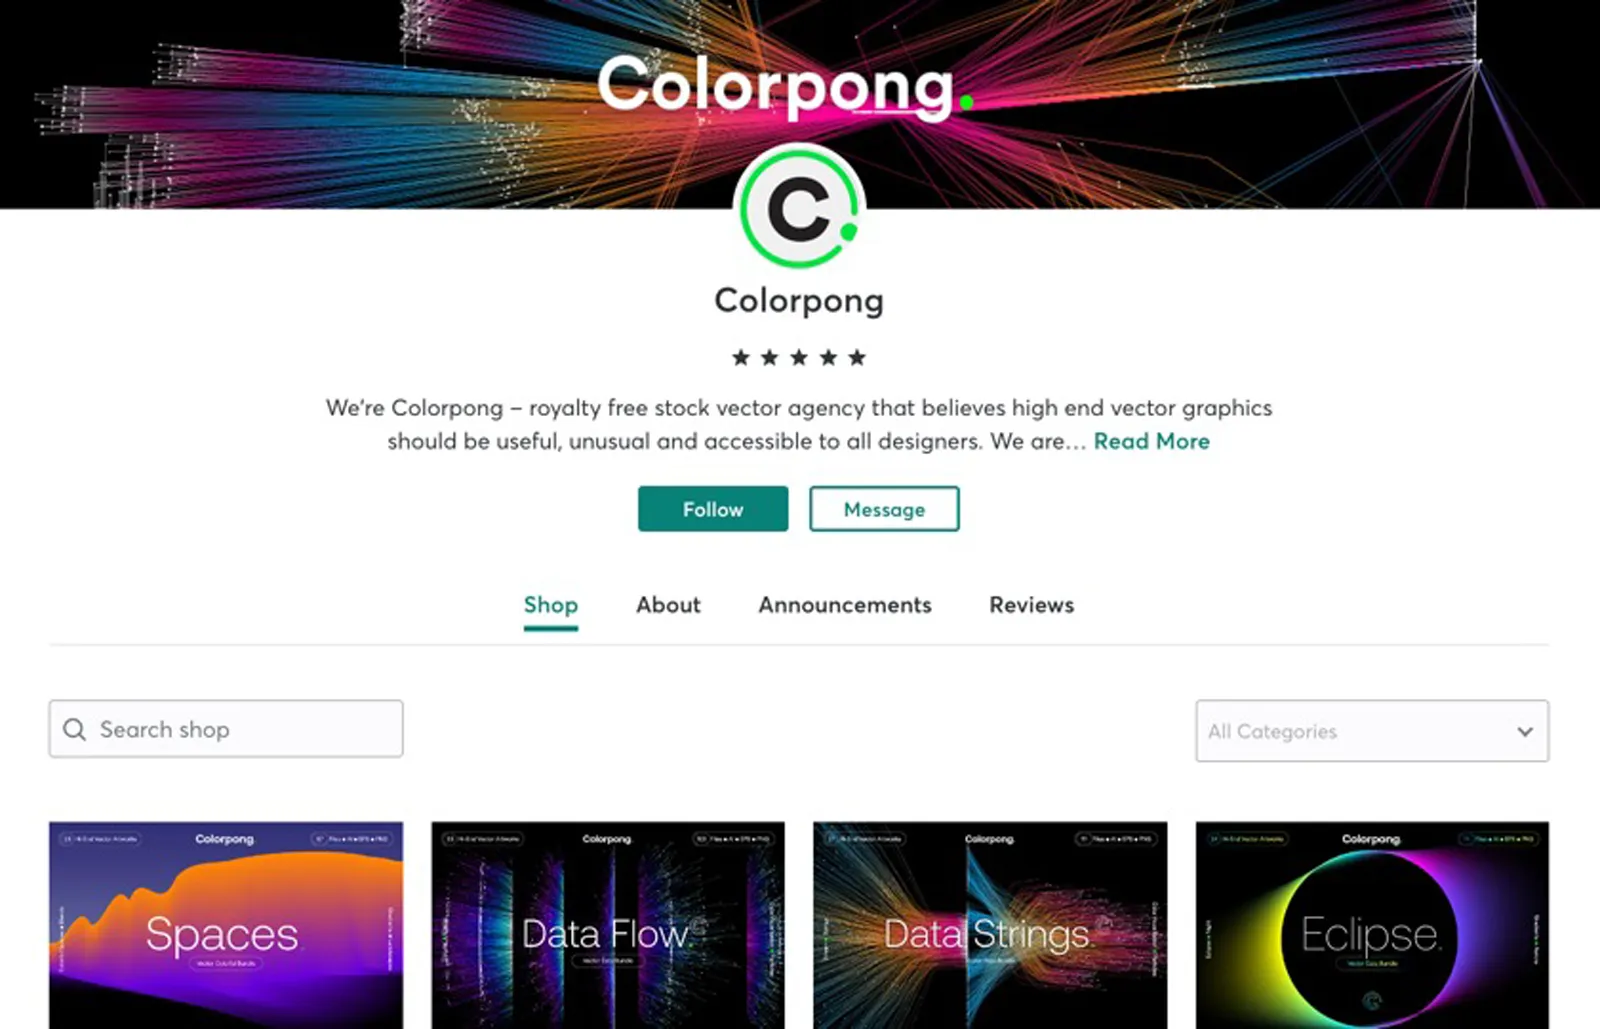 Colorpong